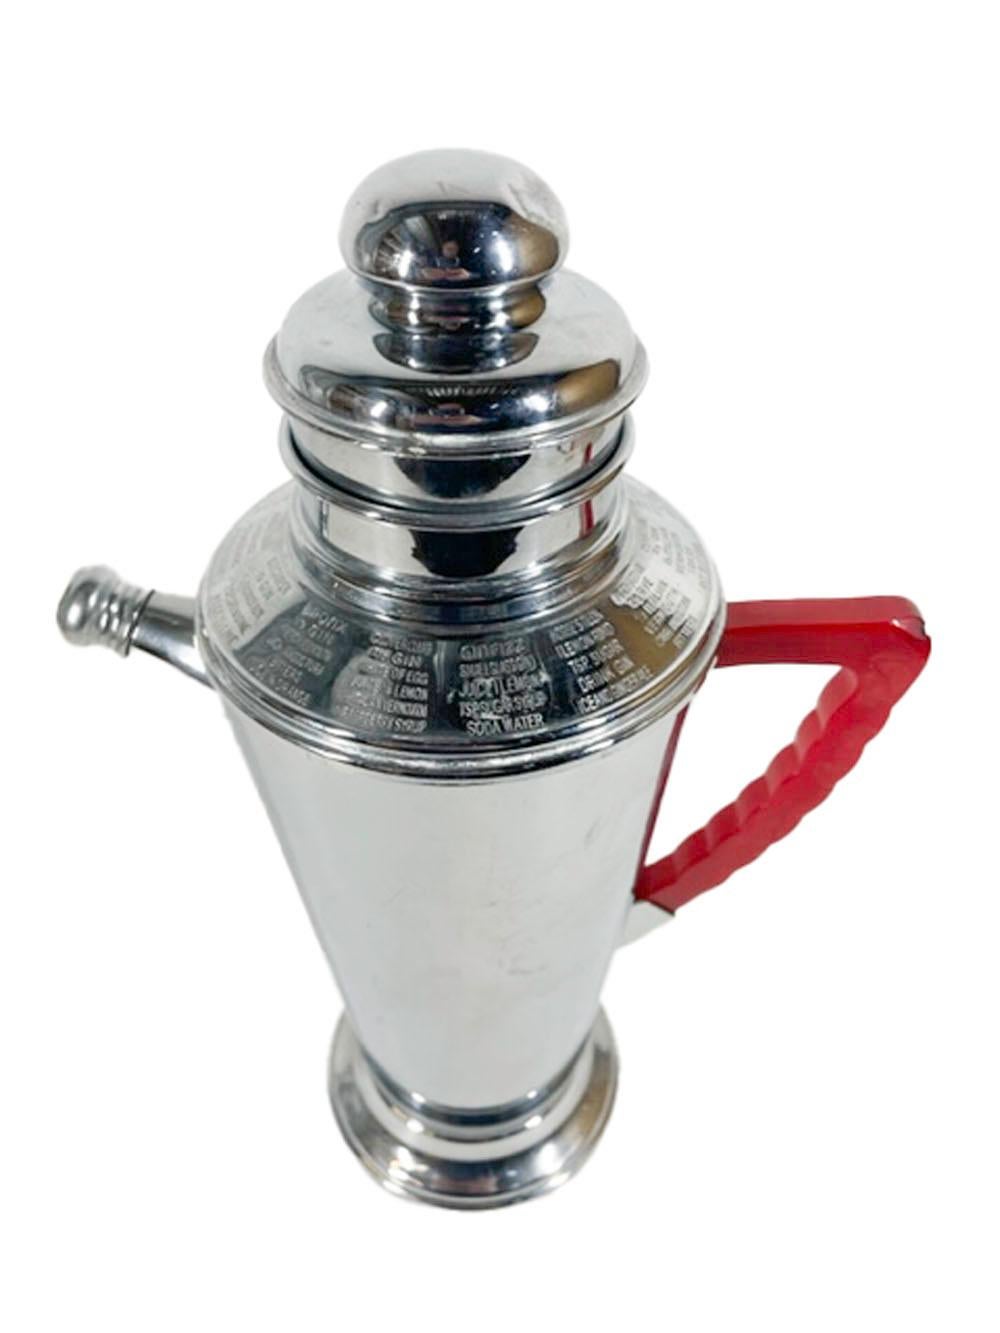 Art Deco chrome plated cocktail shaker by the National Silver Company, with a red Bakelite handle and having an angled shoulder engraved with 14 cocktail recipes above an inverted conical body raised on a stepped foot. Marked on the underside 